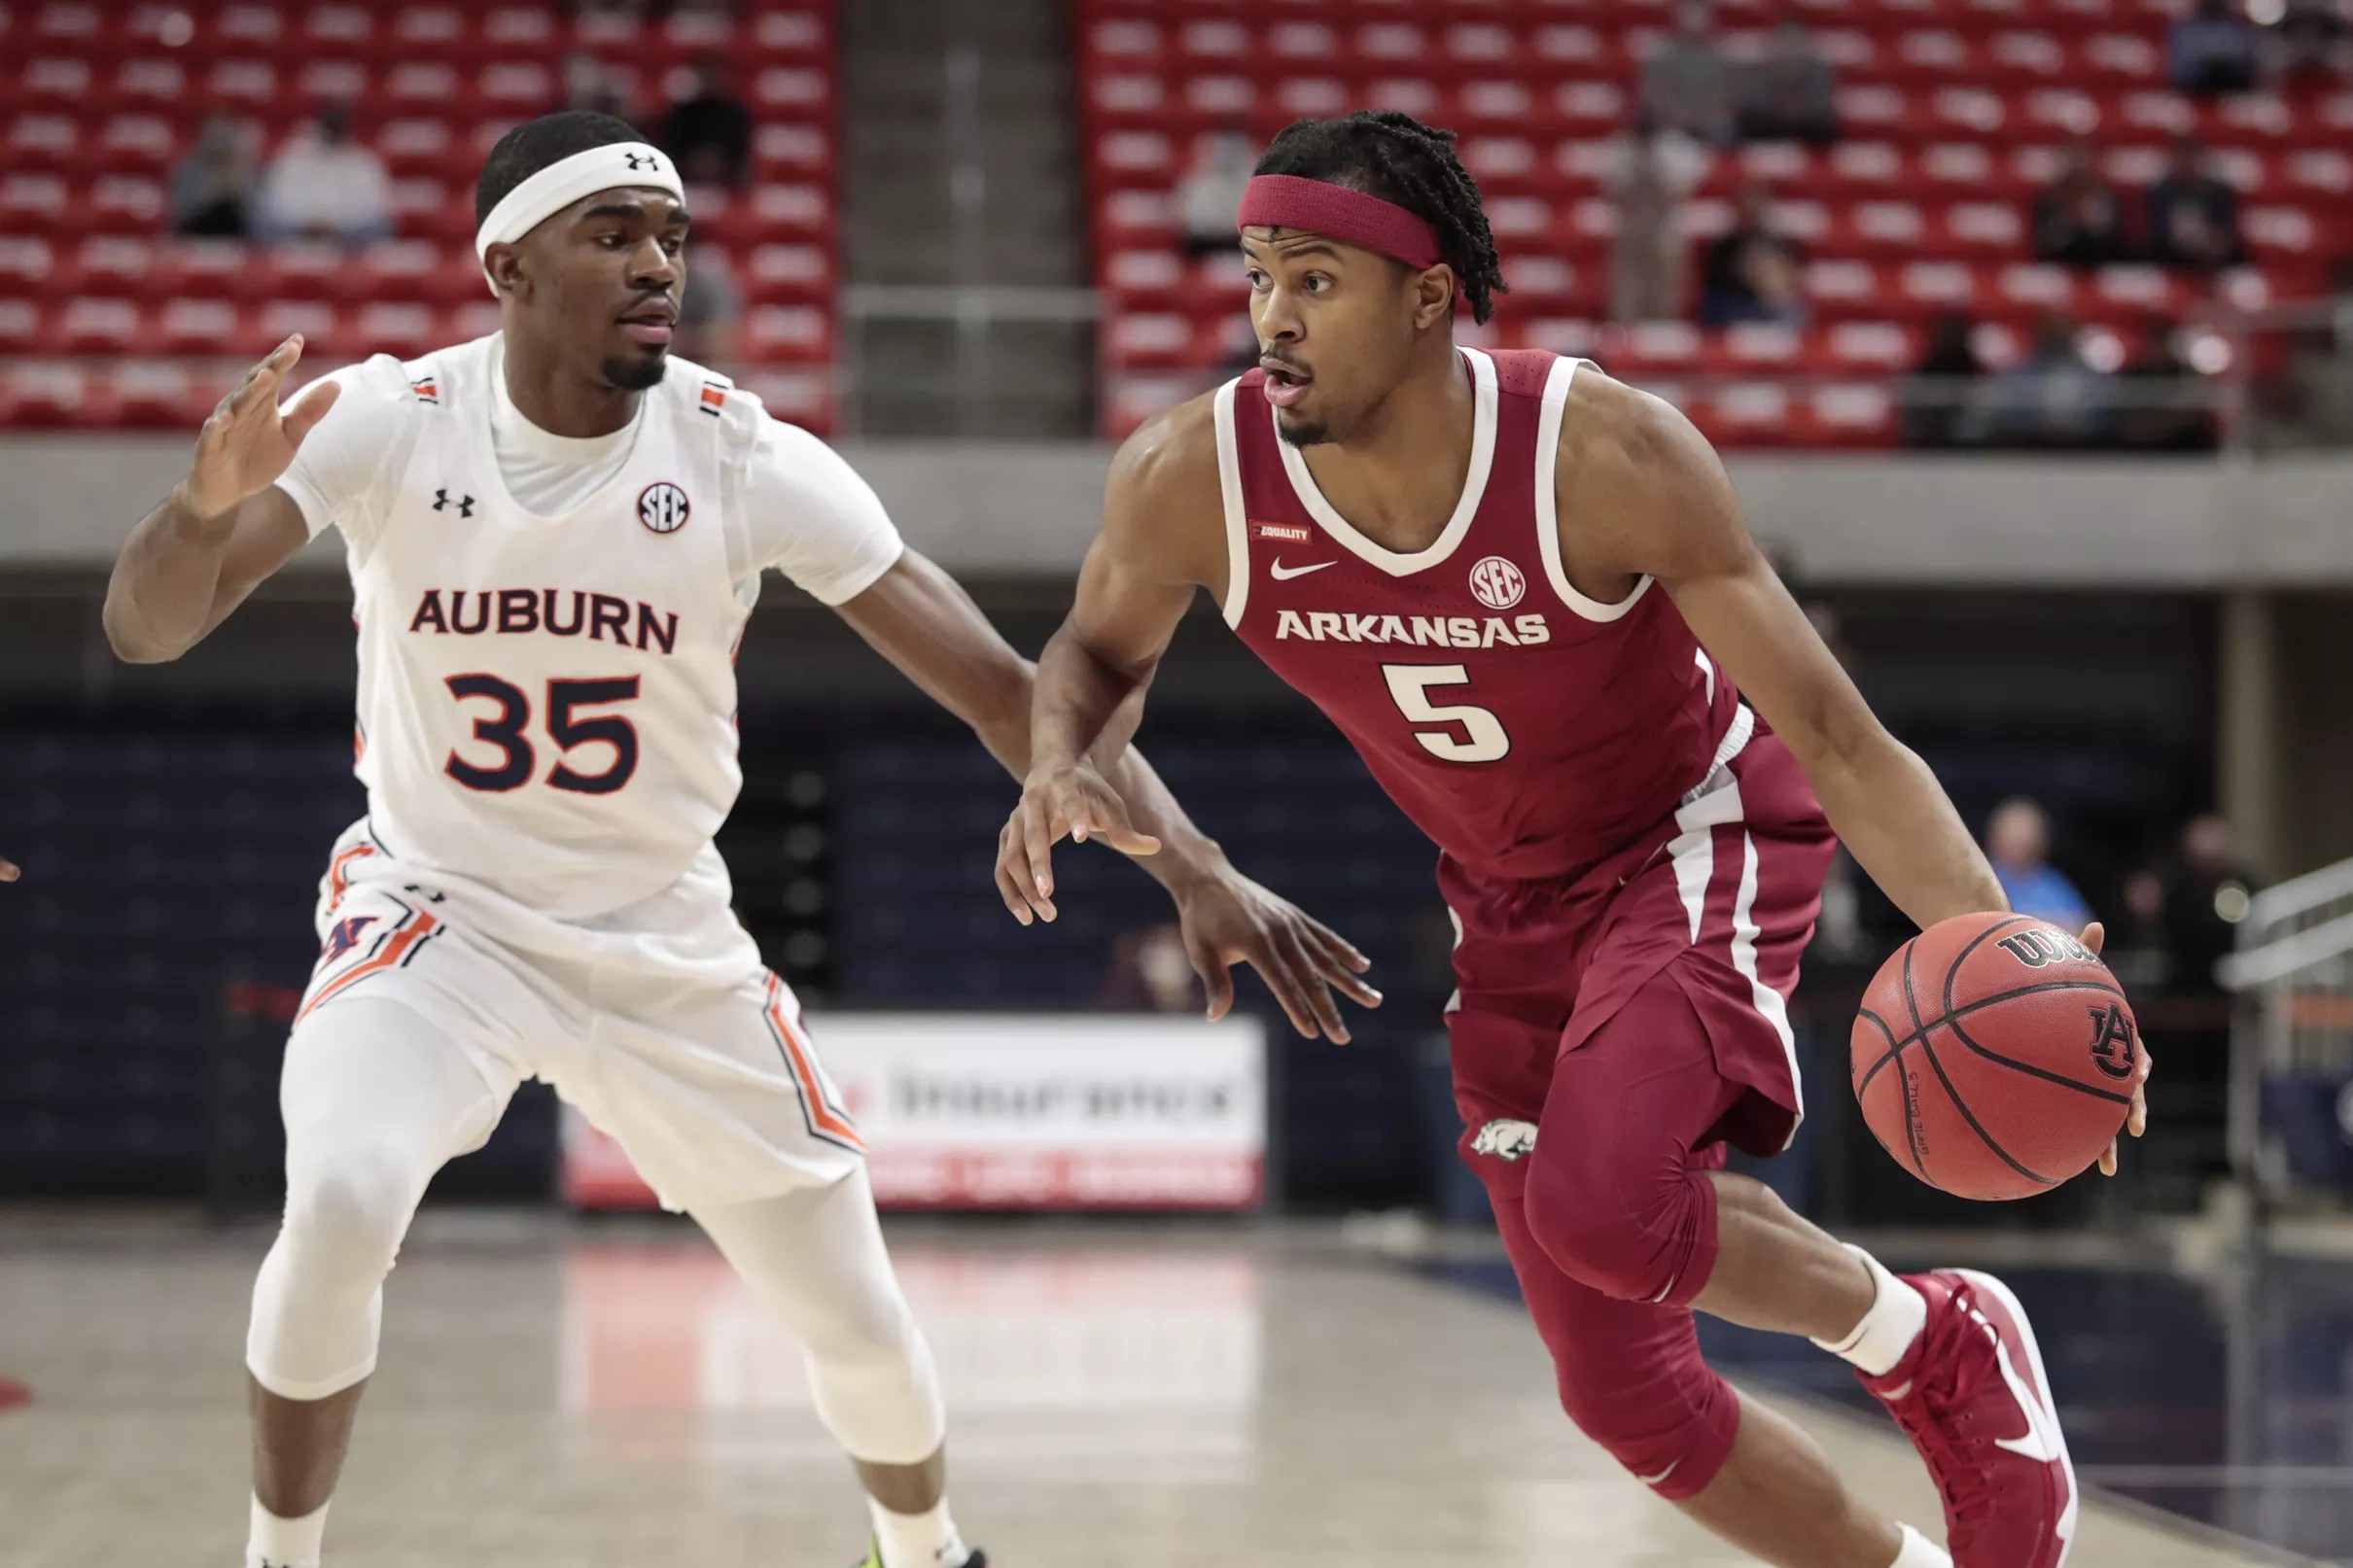 Where Will Arkansas Basketball Be Ranked After Huge Week?